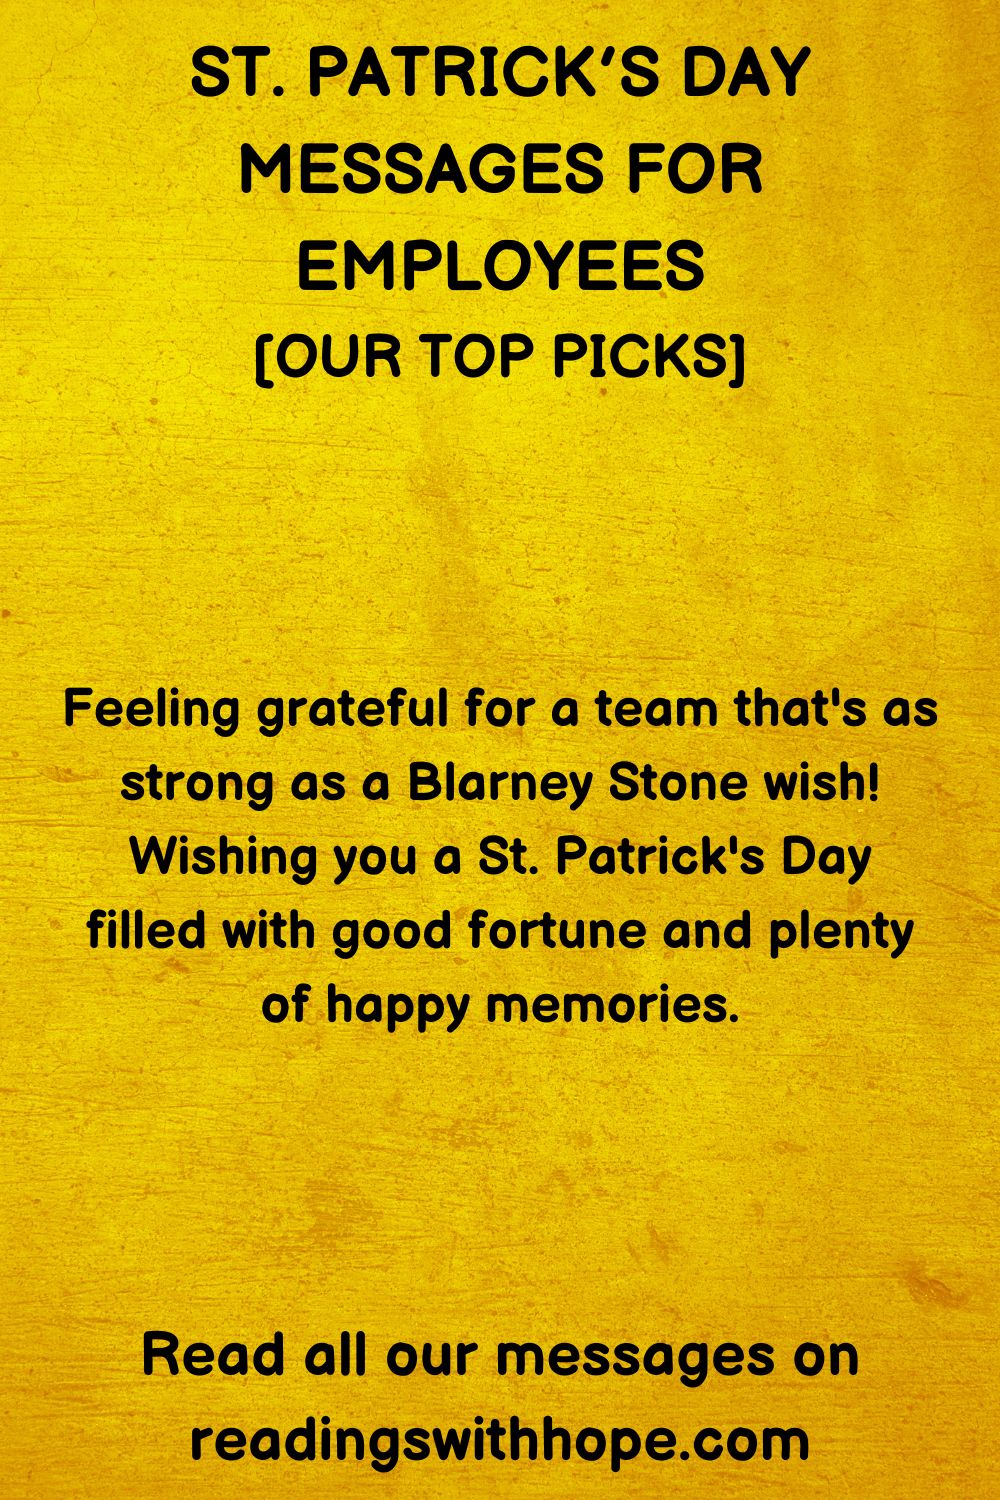 patrick's day message for employees